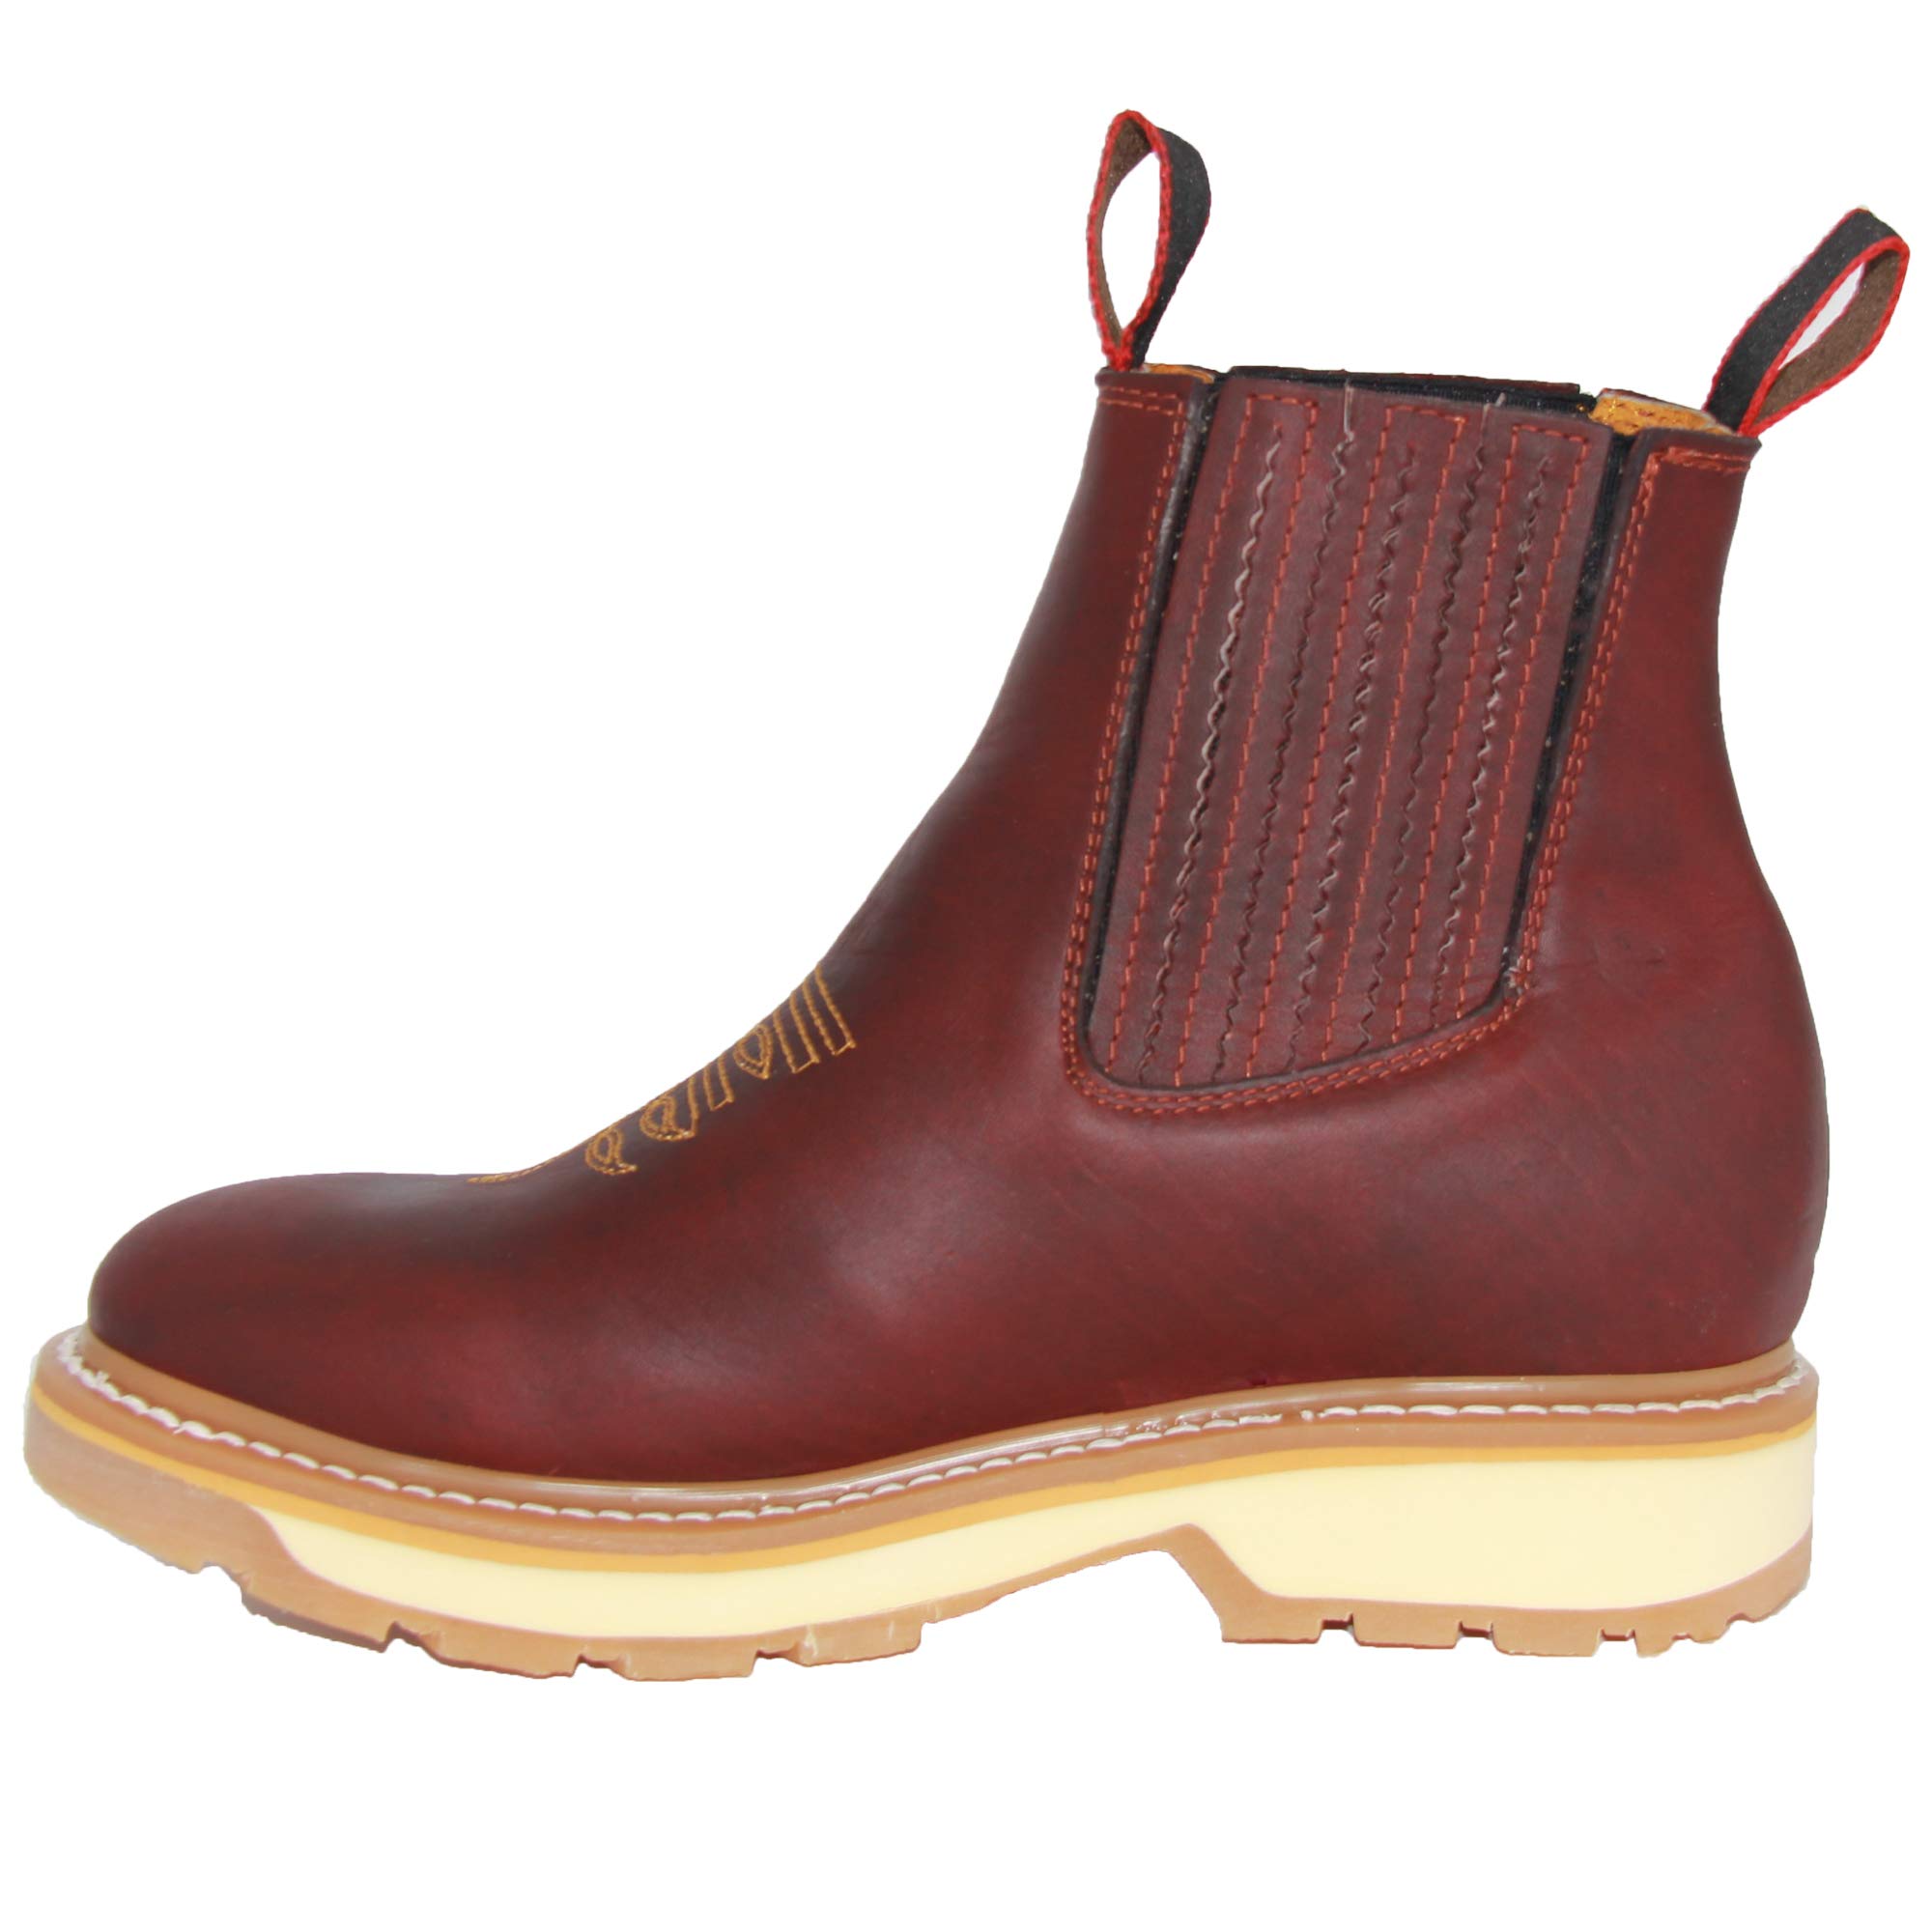 The Western Shops Leather Short Ankle Soft Toe Work Boot - image 2 of 4